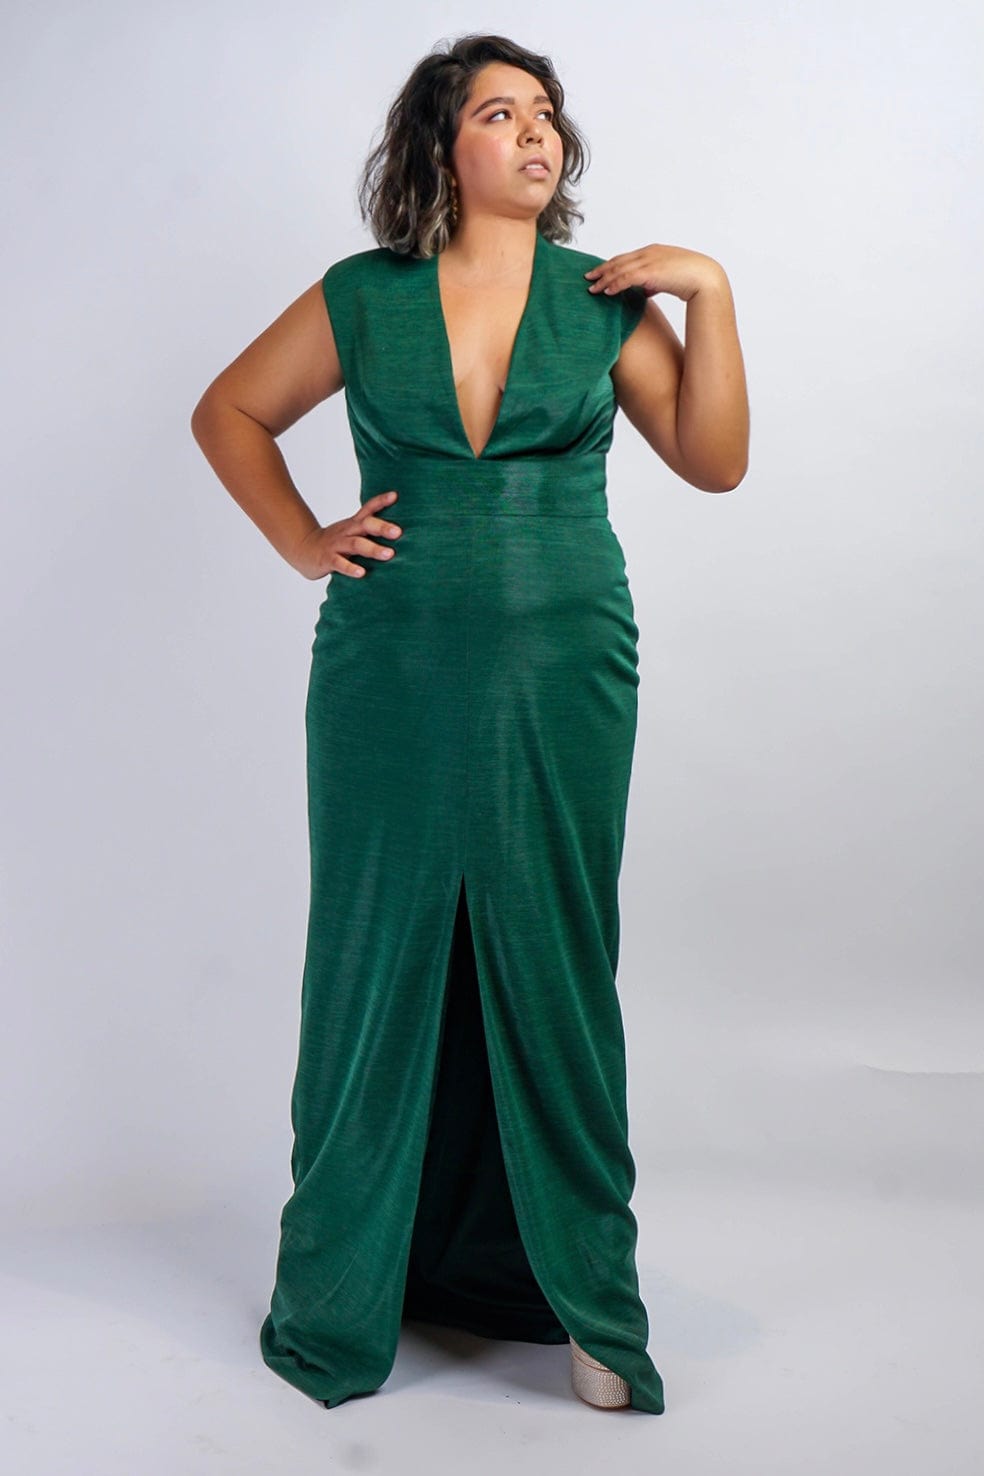 Chloe Dao GOWNS Emerald Green Luxe V Neck Aiden Gown